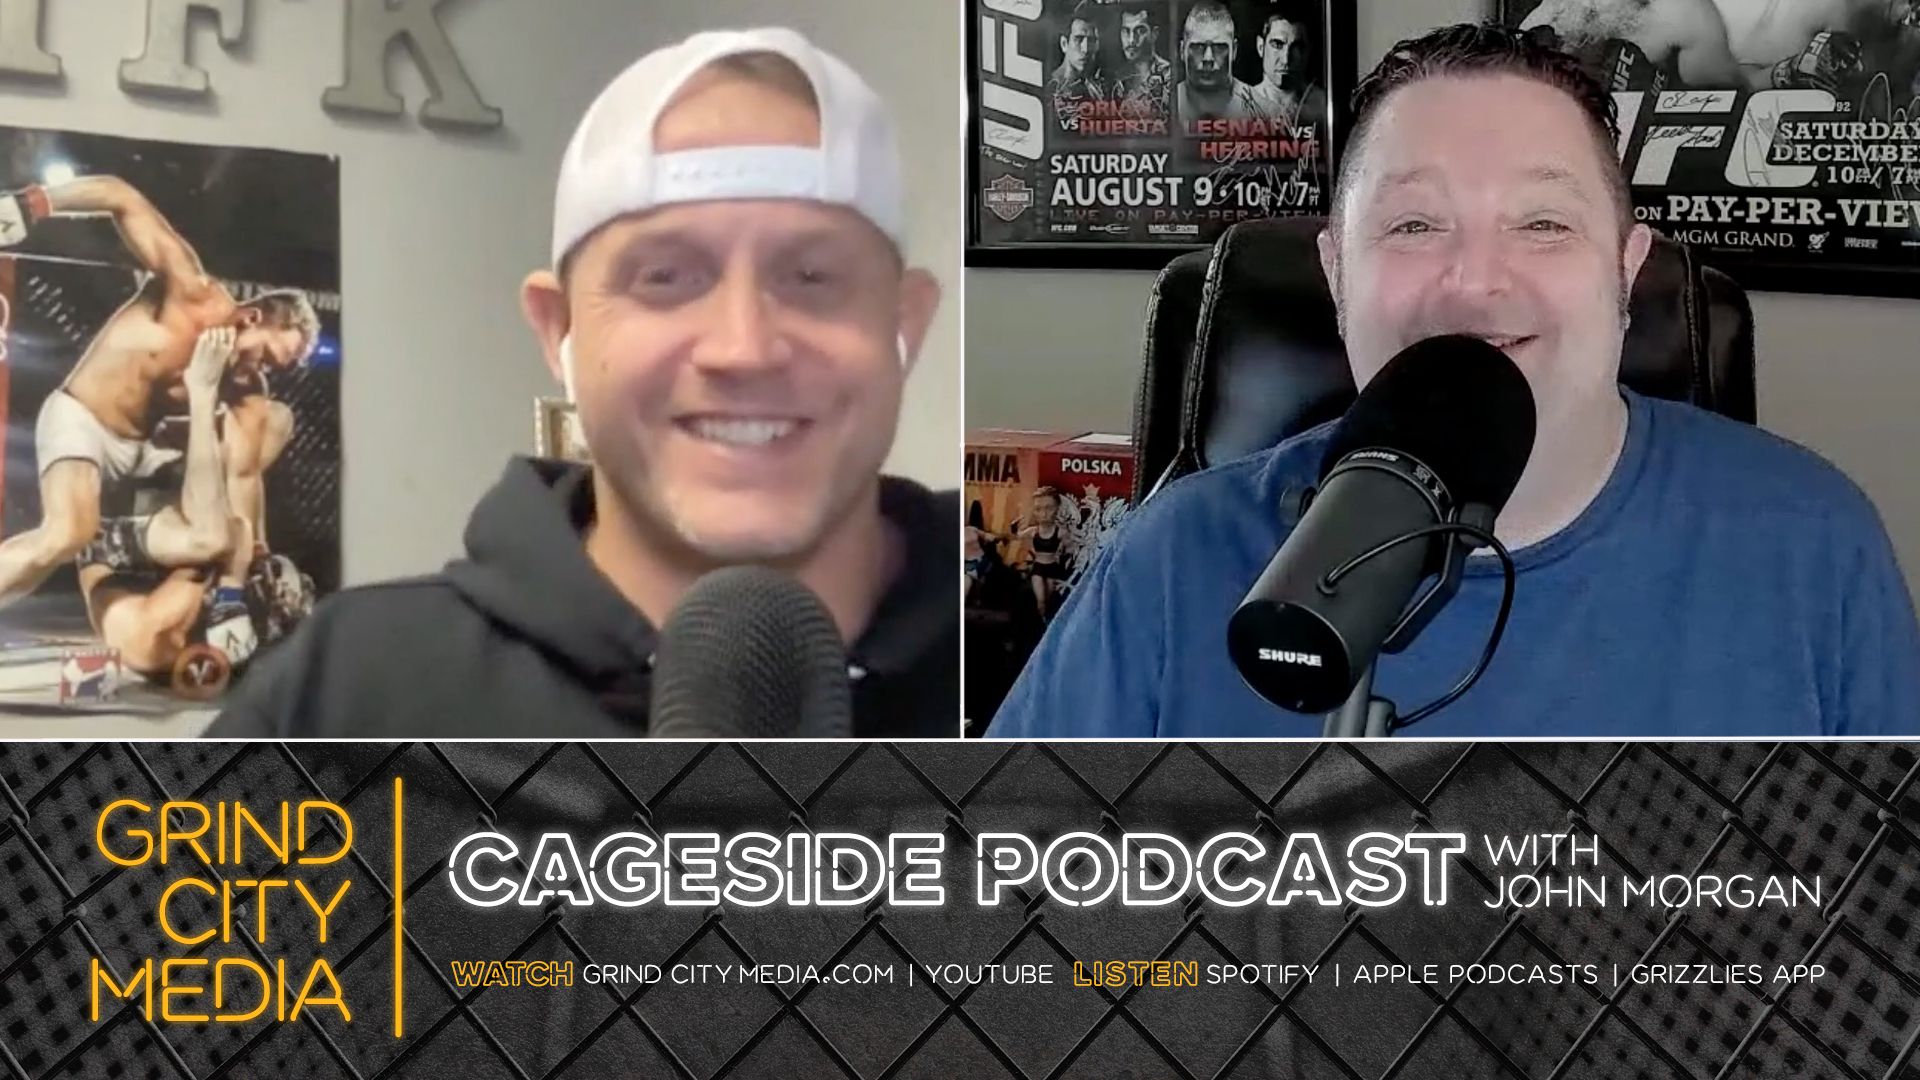 Cageside with John Morgan: What a Card